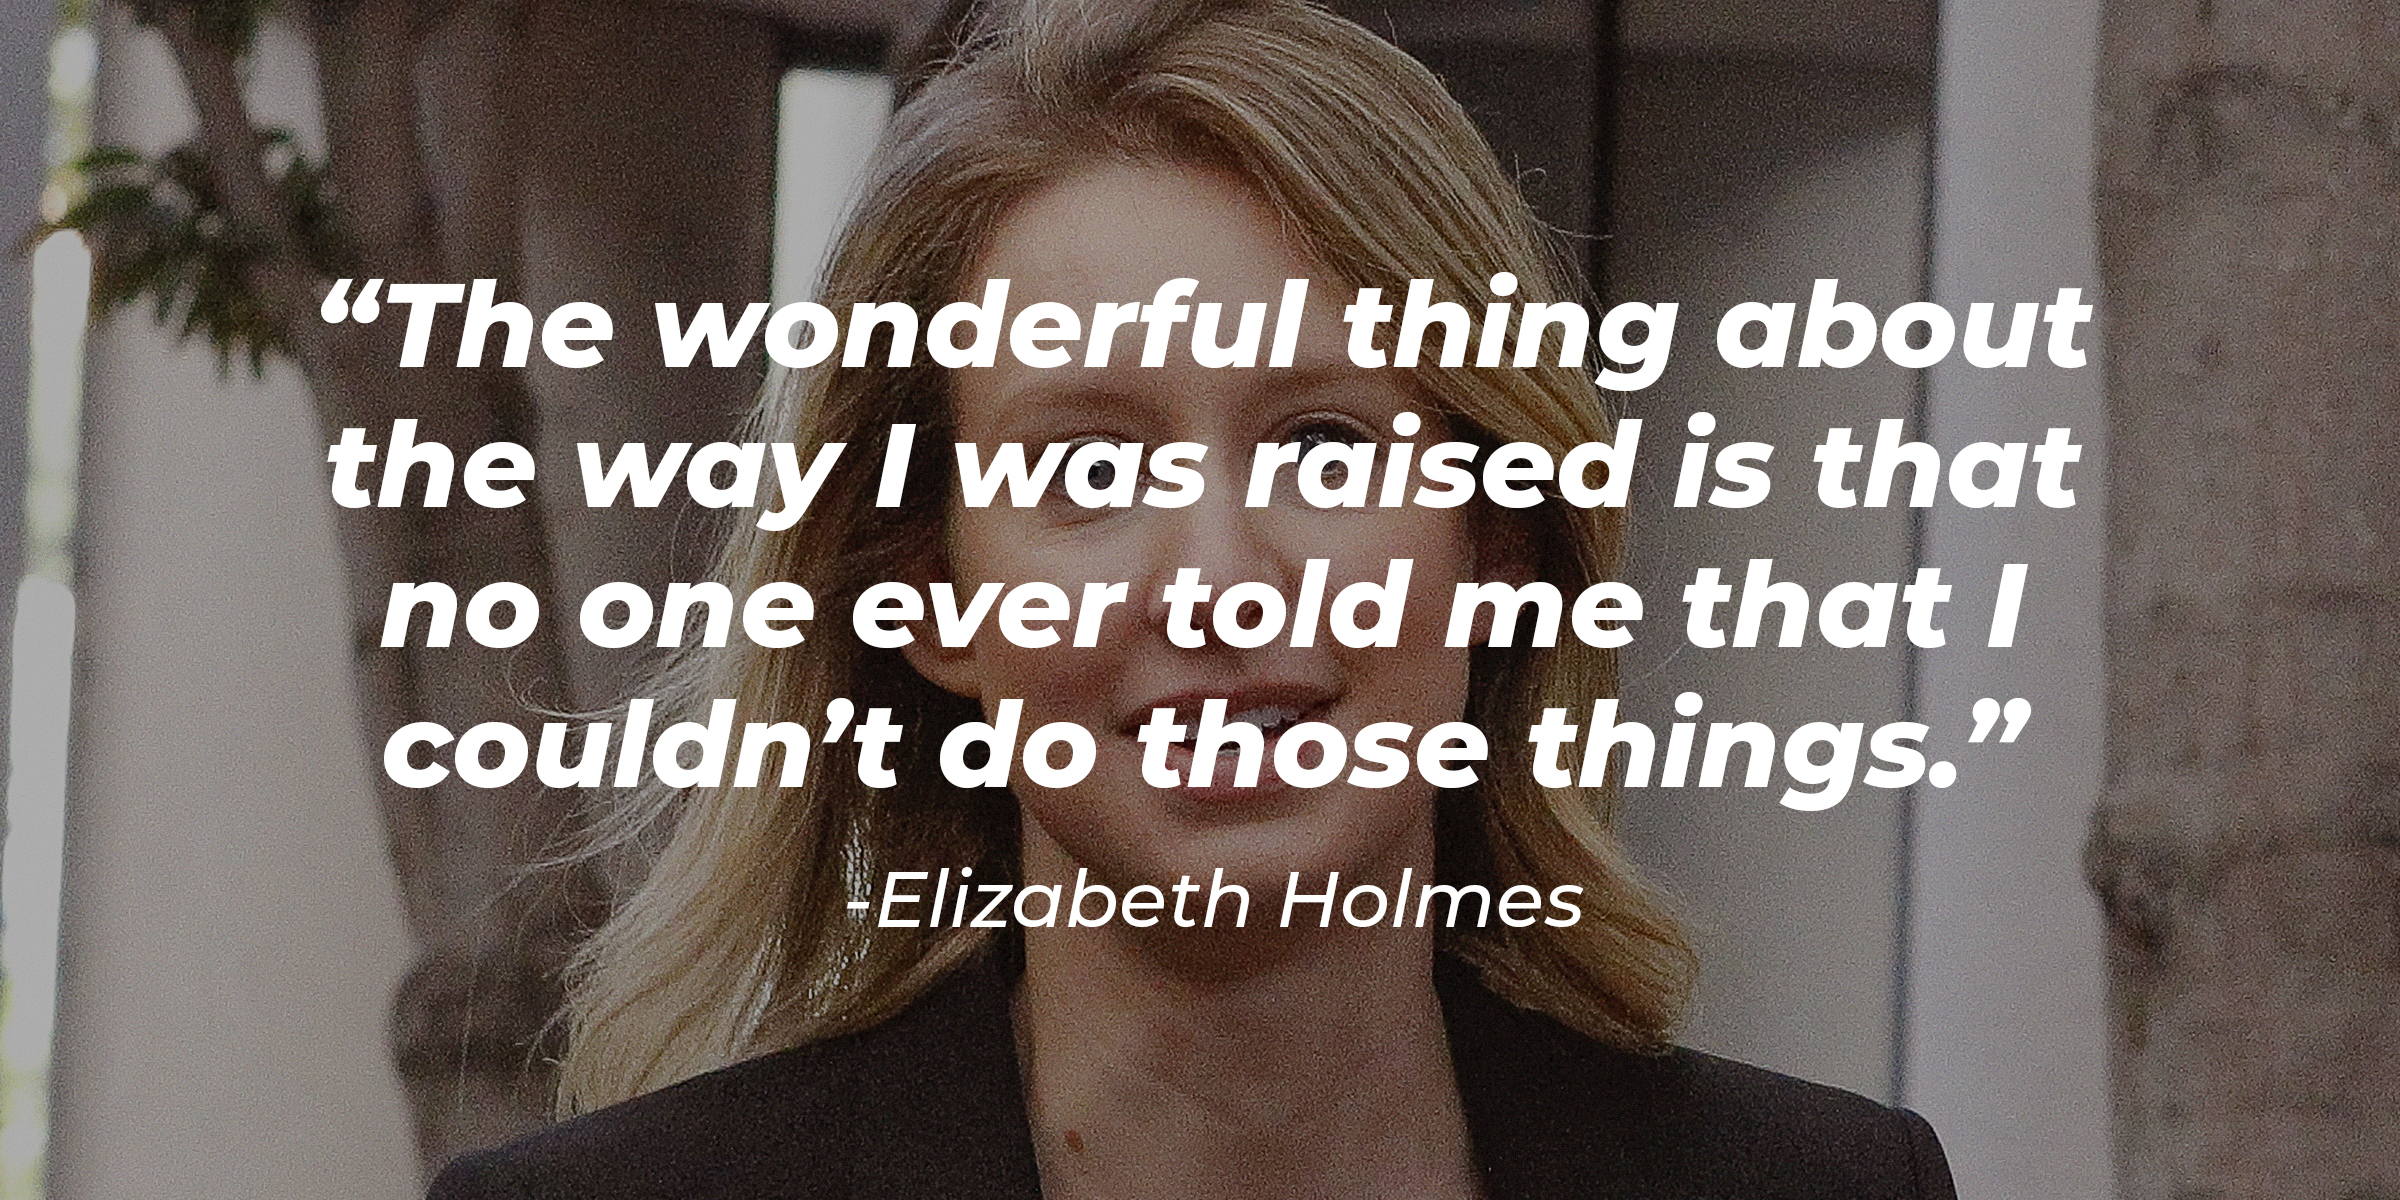 A photo of Elizabeth Holmes with Elizabeth Holmes' quote: “The wonderful thing about the way I was raised is that no one ever told me that I couldn’t do those things.” | Source: Getty Images